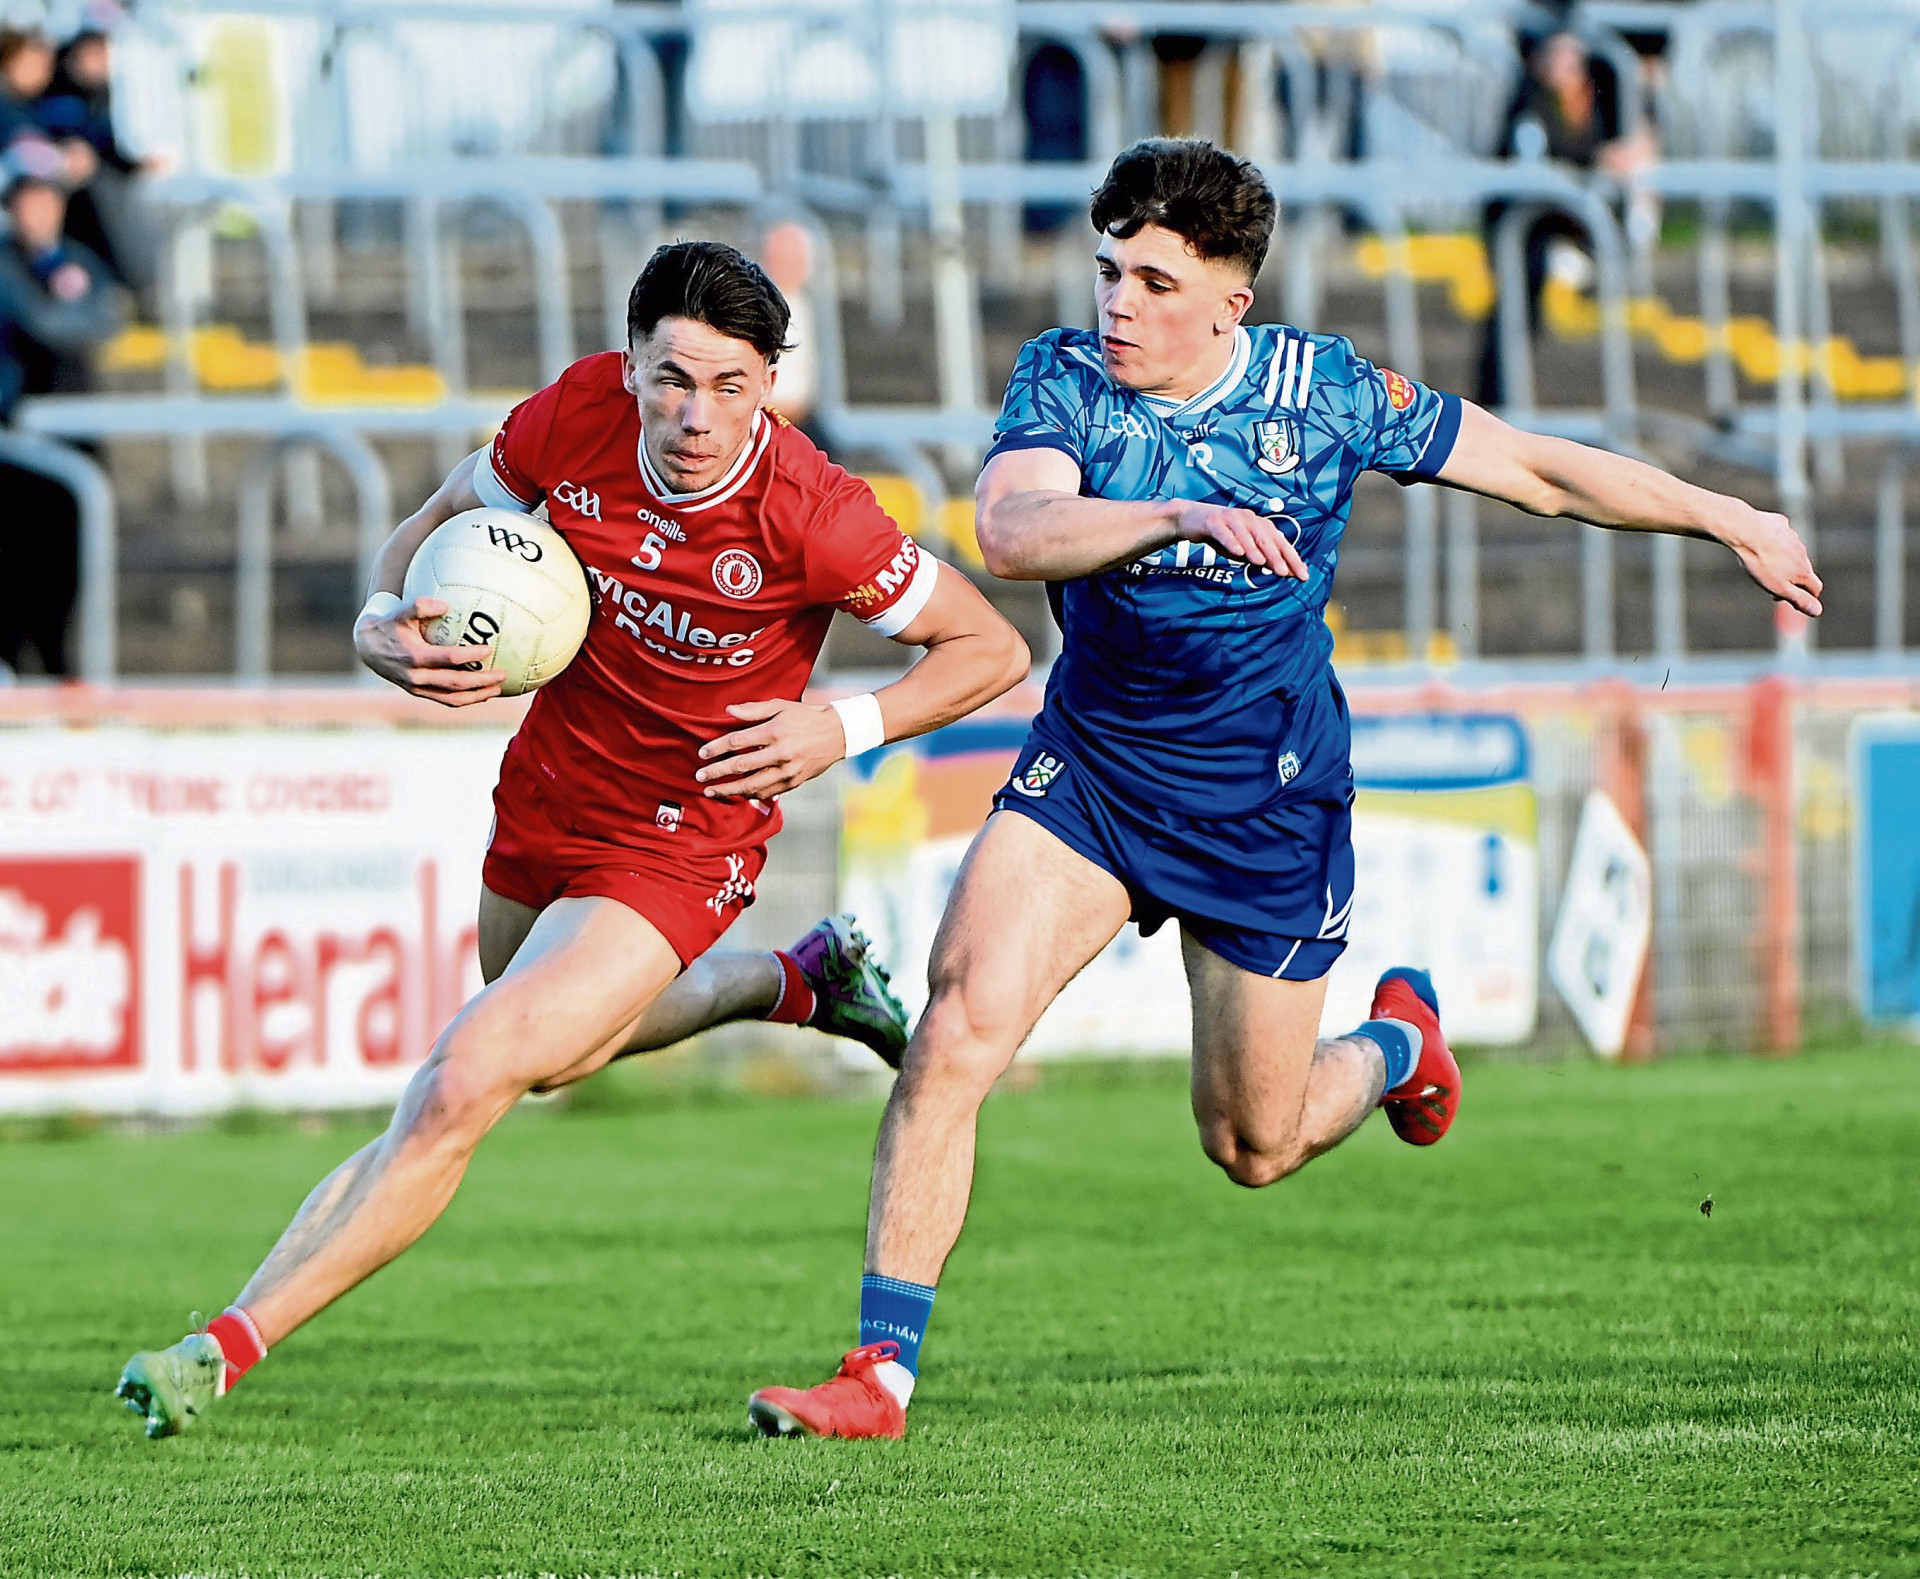 O’Hare and Burns among subs as Tyrone name their team for Clare